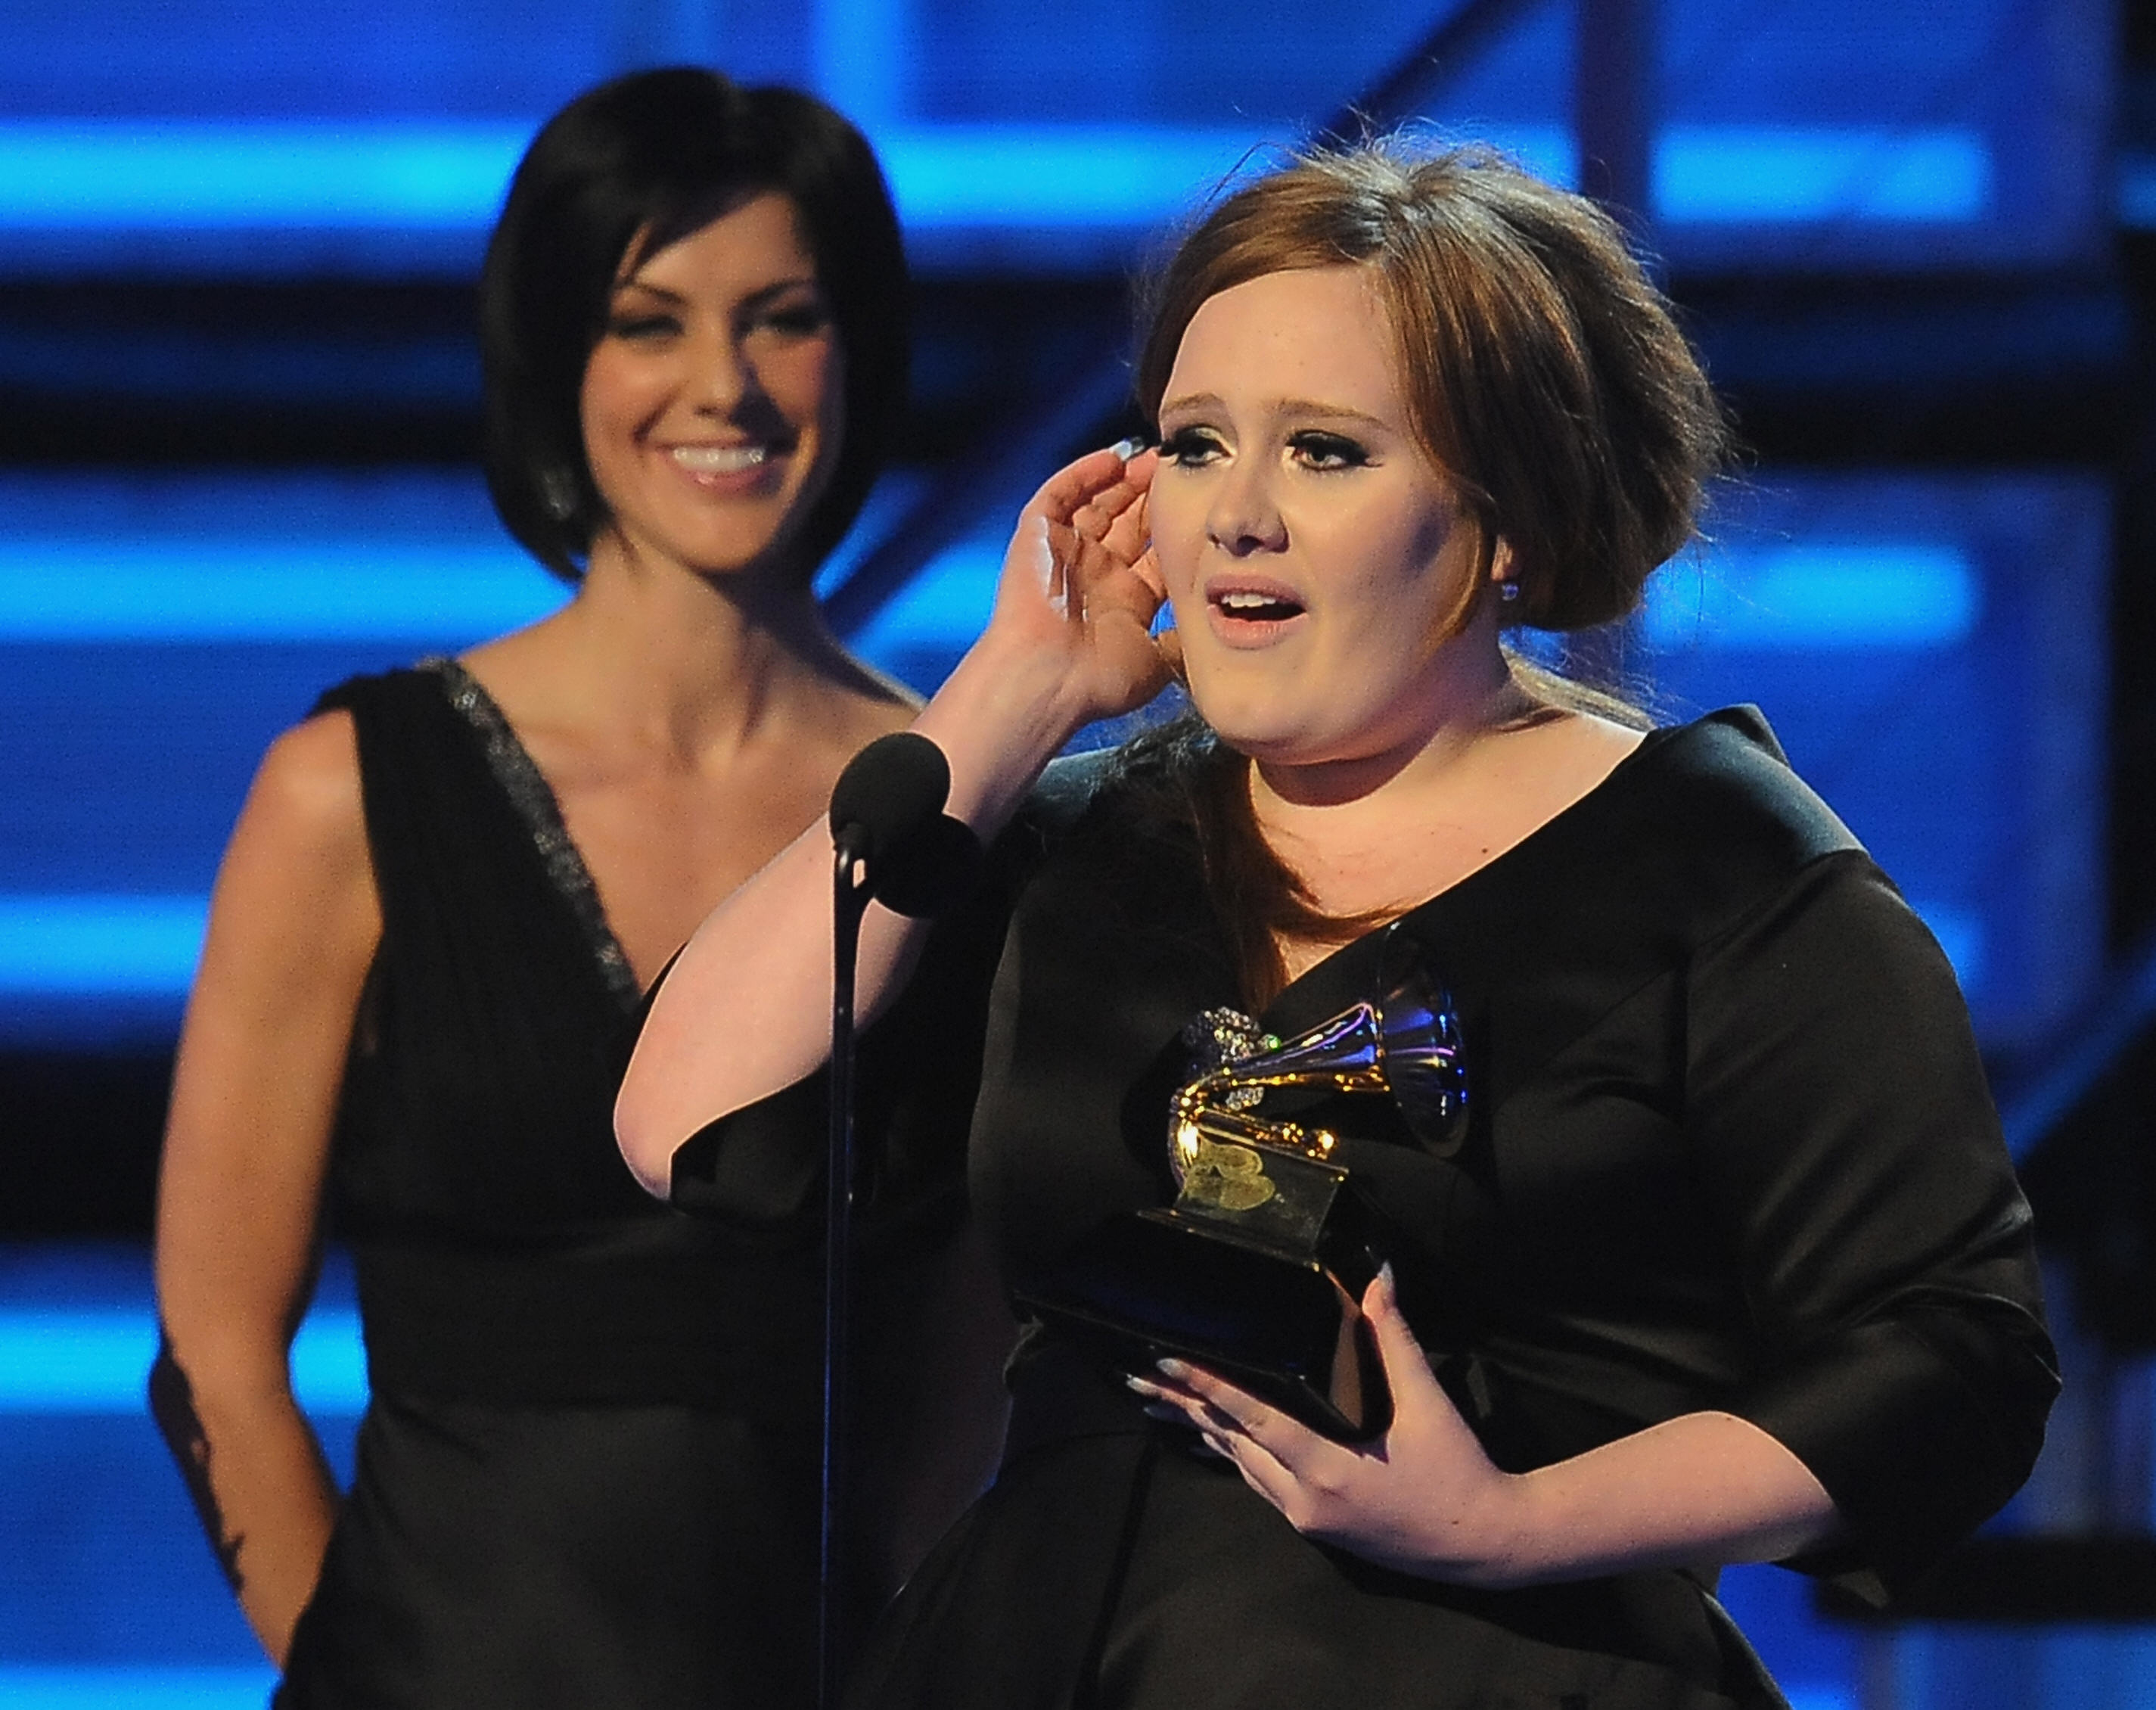 Adele accepting her Grammy